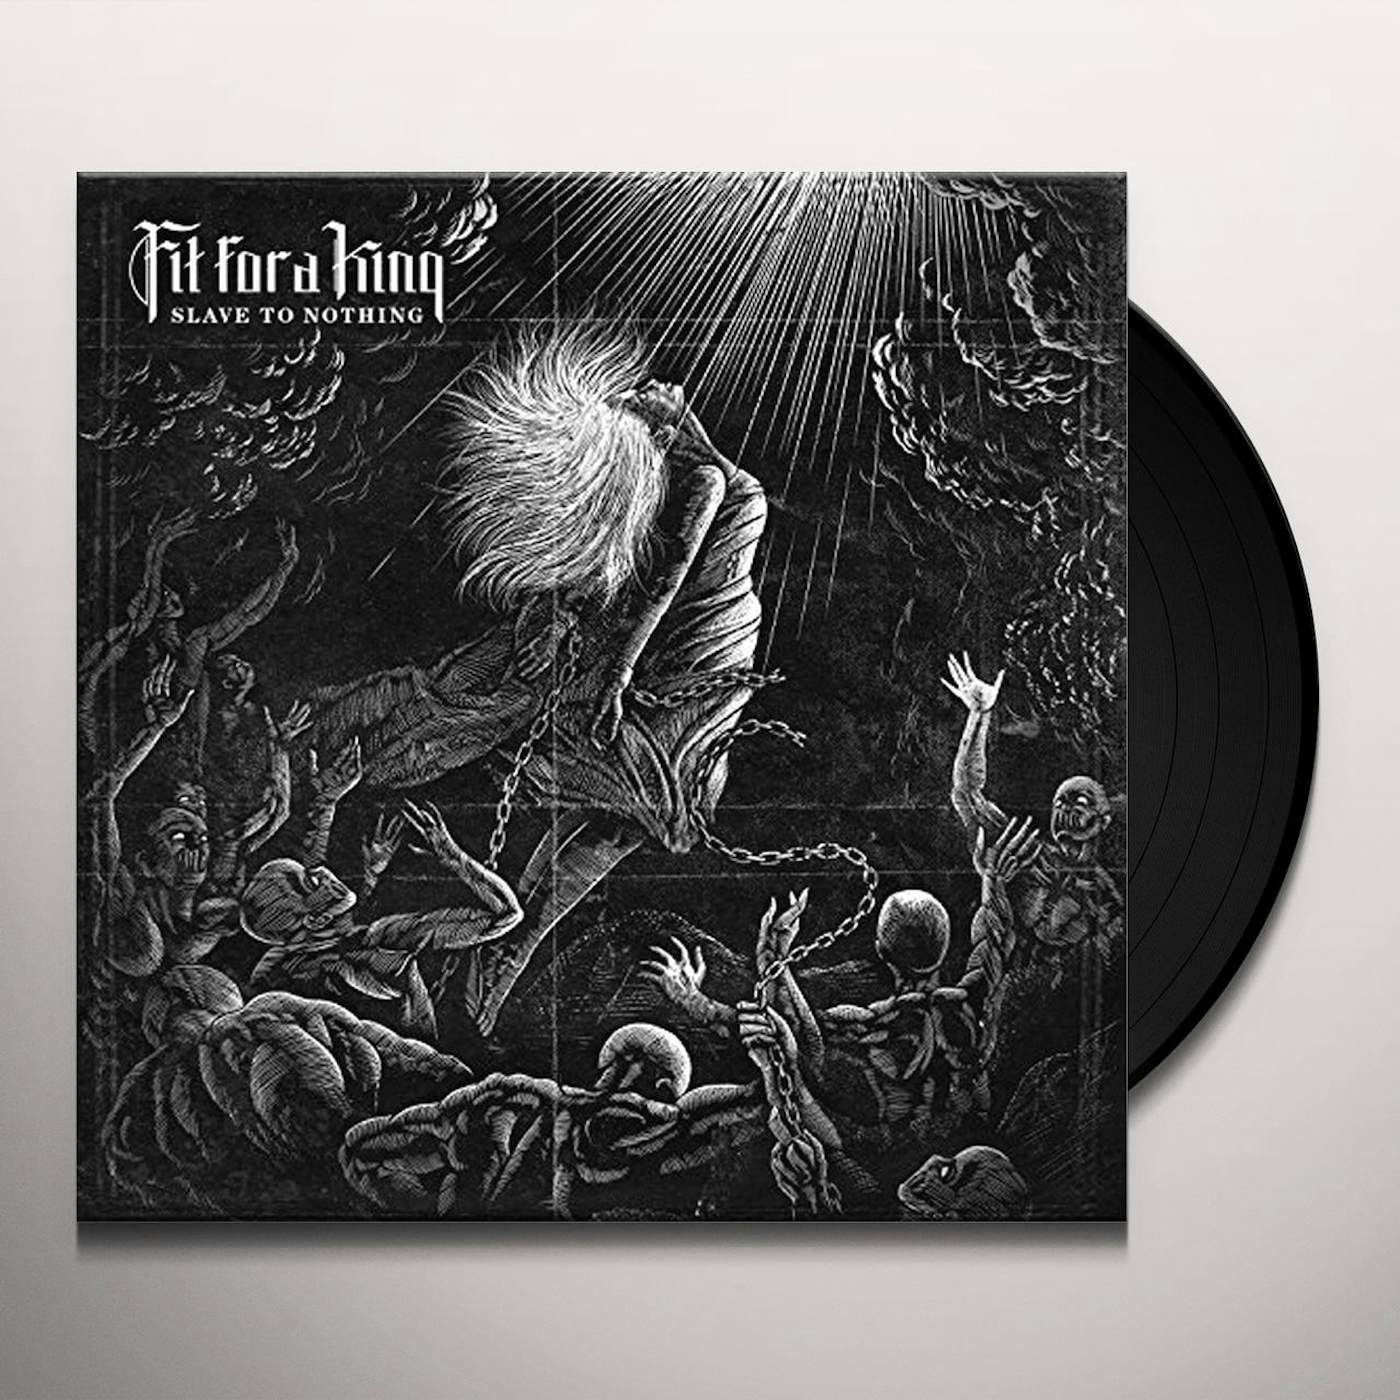 Fit For A King Slave to Nothing Vinyl Record